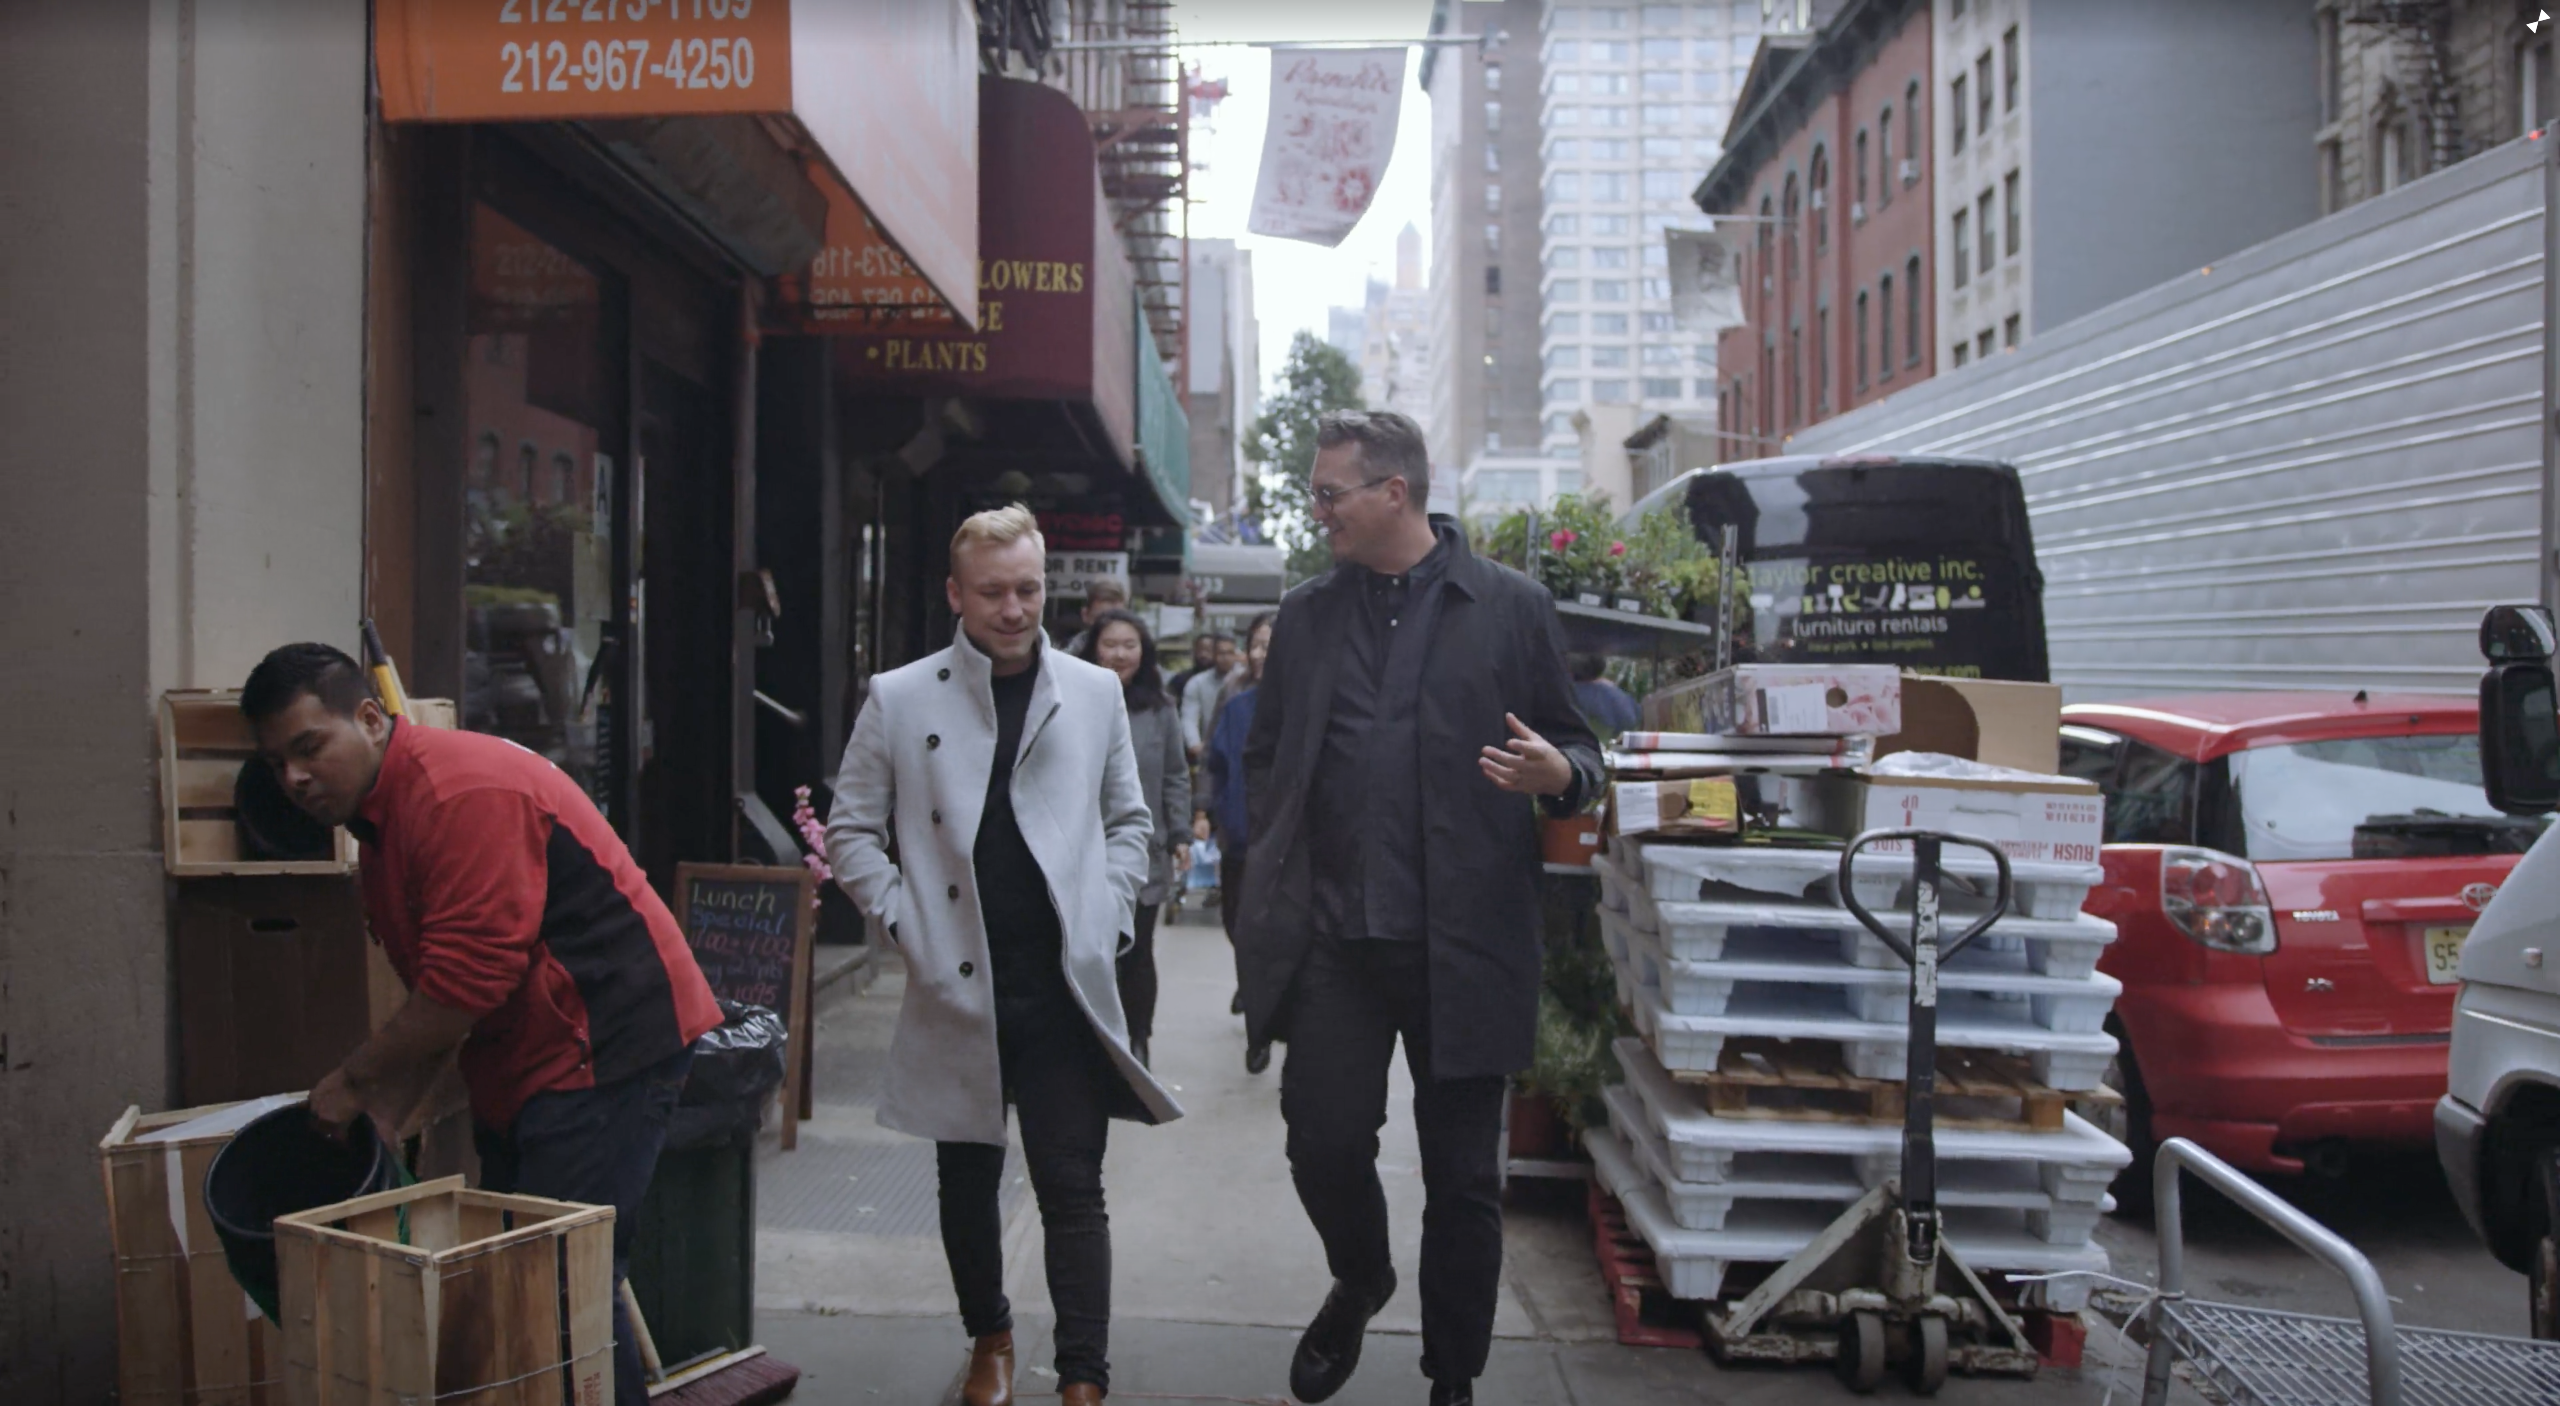 IU EDSA Design Studio NYC with two men walking down a street talking with cars parked nearby